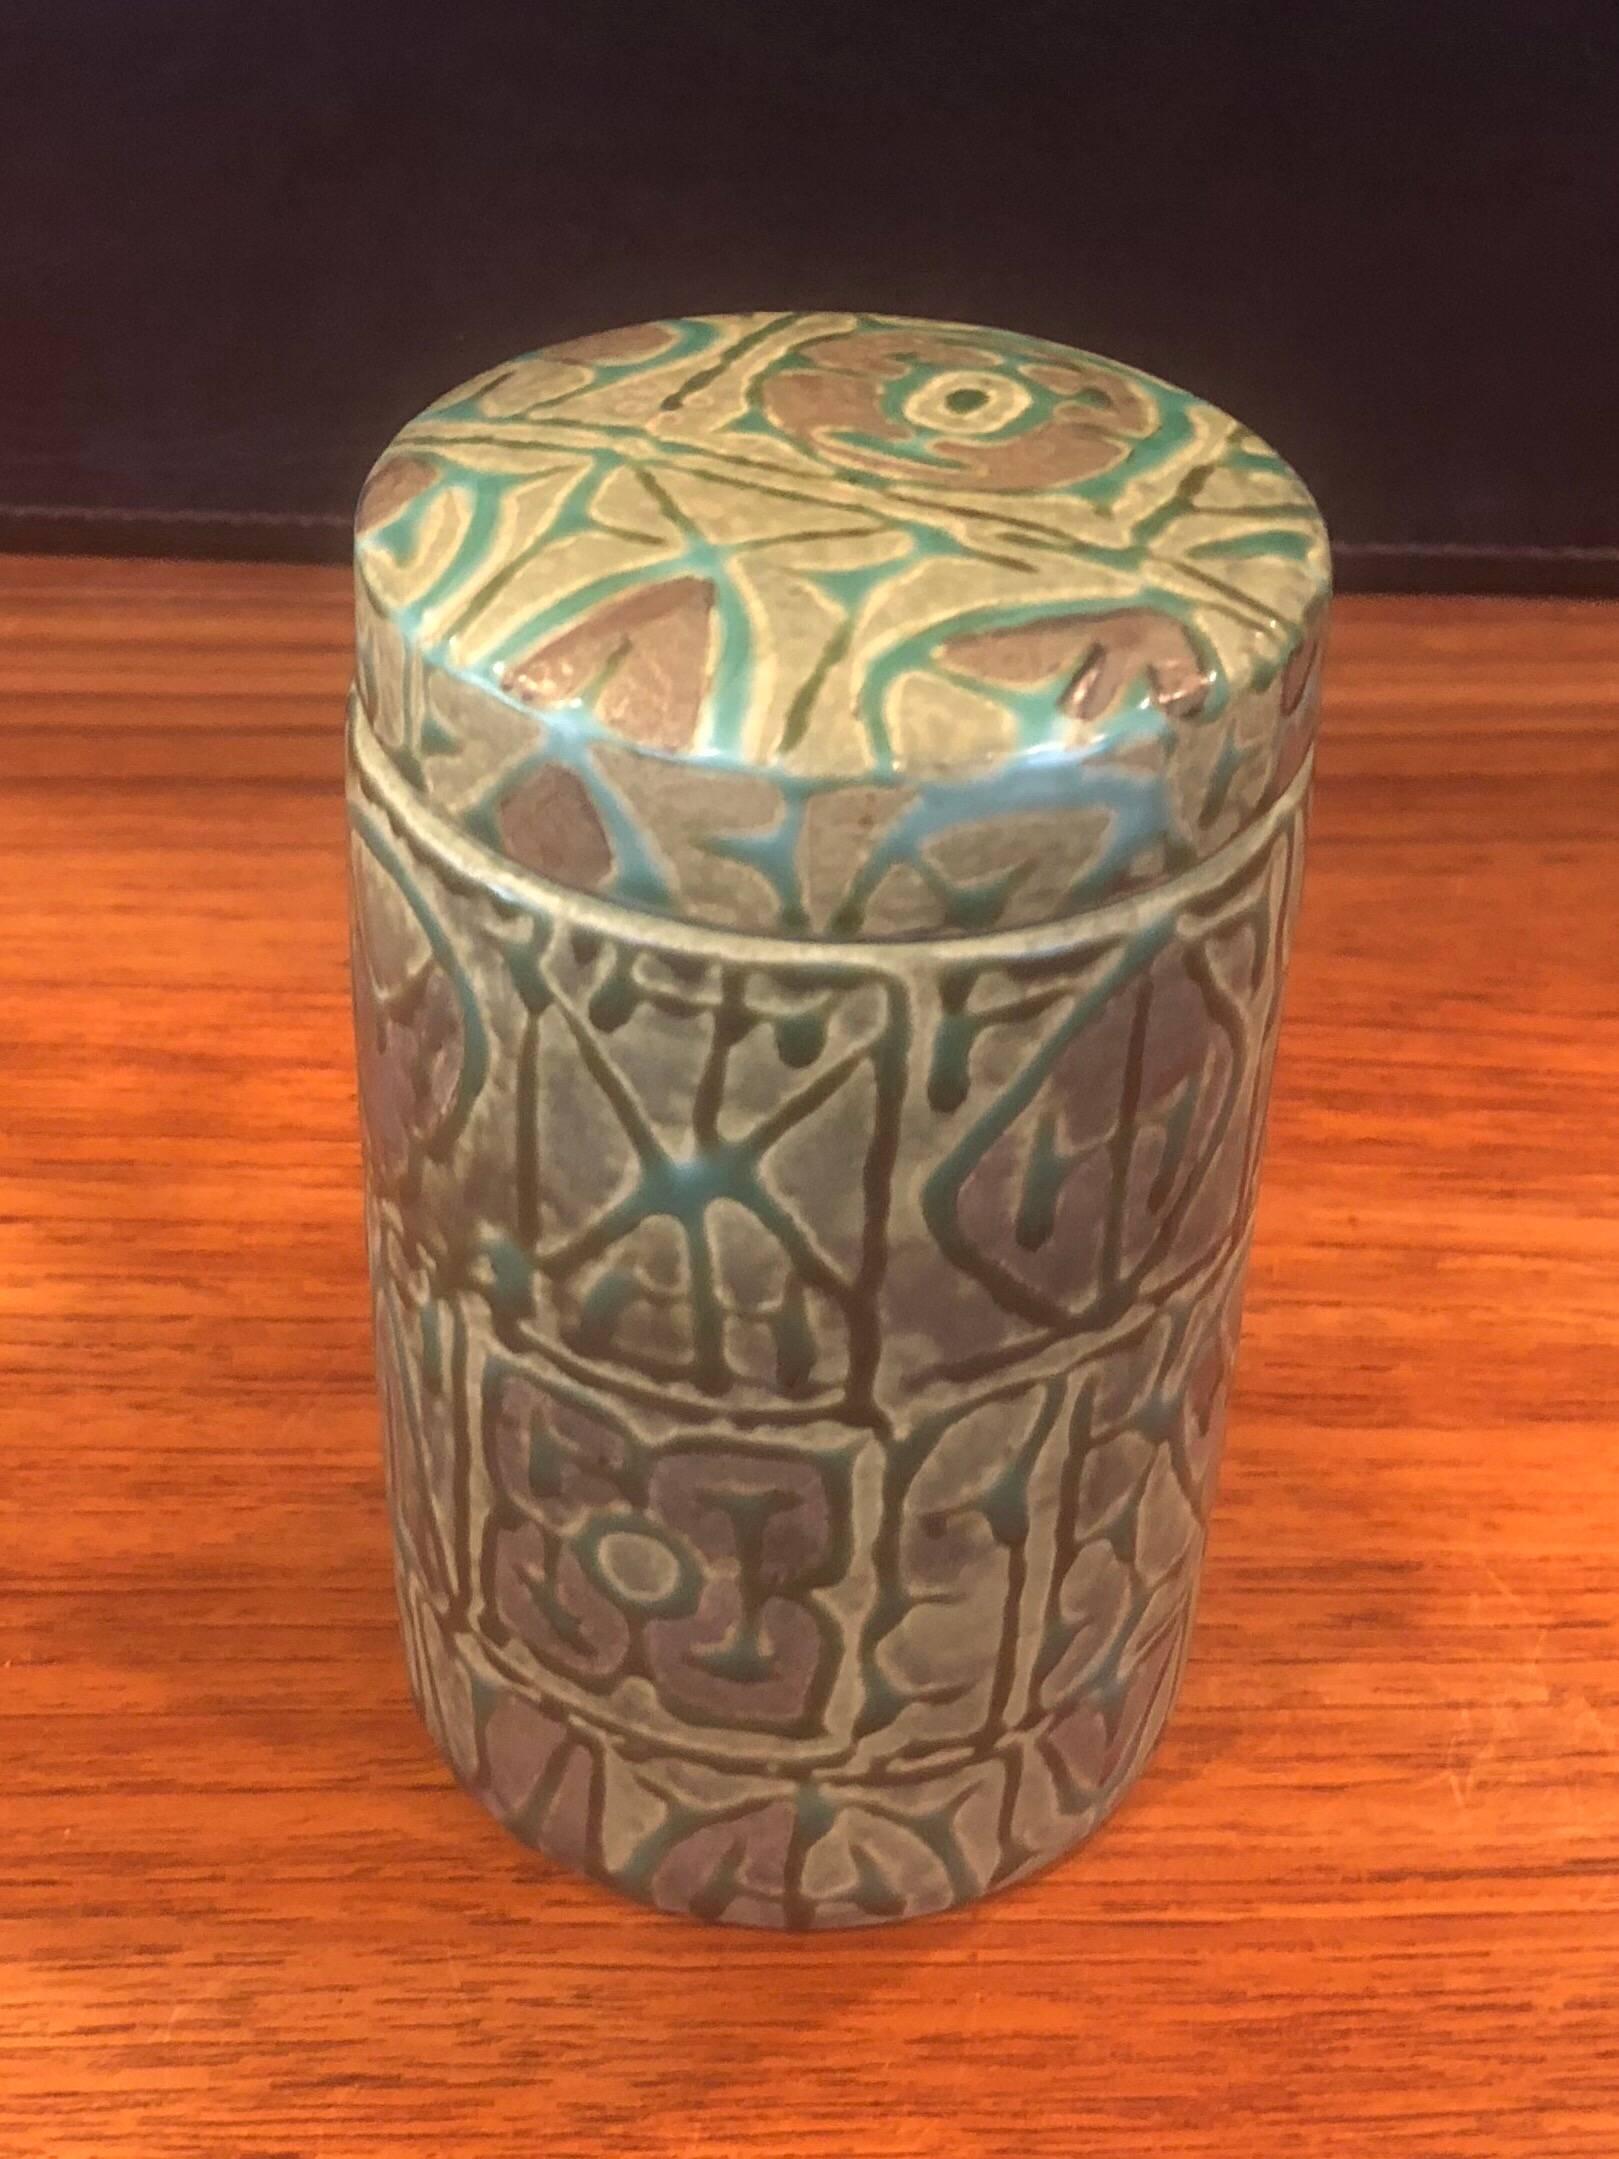 Fajance ceramic lidded jar / humidor from the Baca line by Nils Thorsson for Royal Copenhagen, circa 1960s. The green glazed stoneware jar with geometric abstract design in relief was designed by Royal Copenhagen's renowned artistic director, Nils